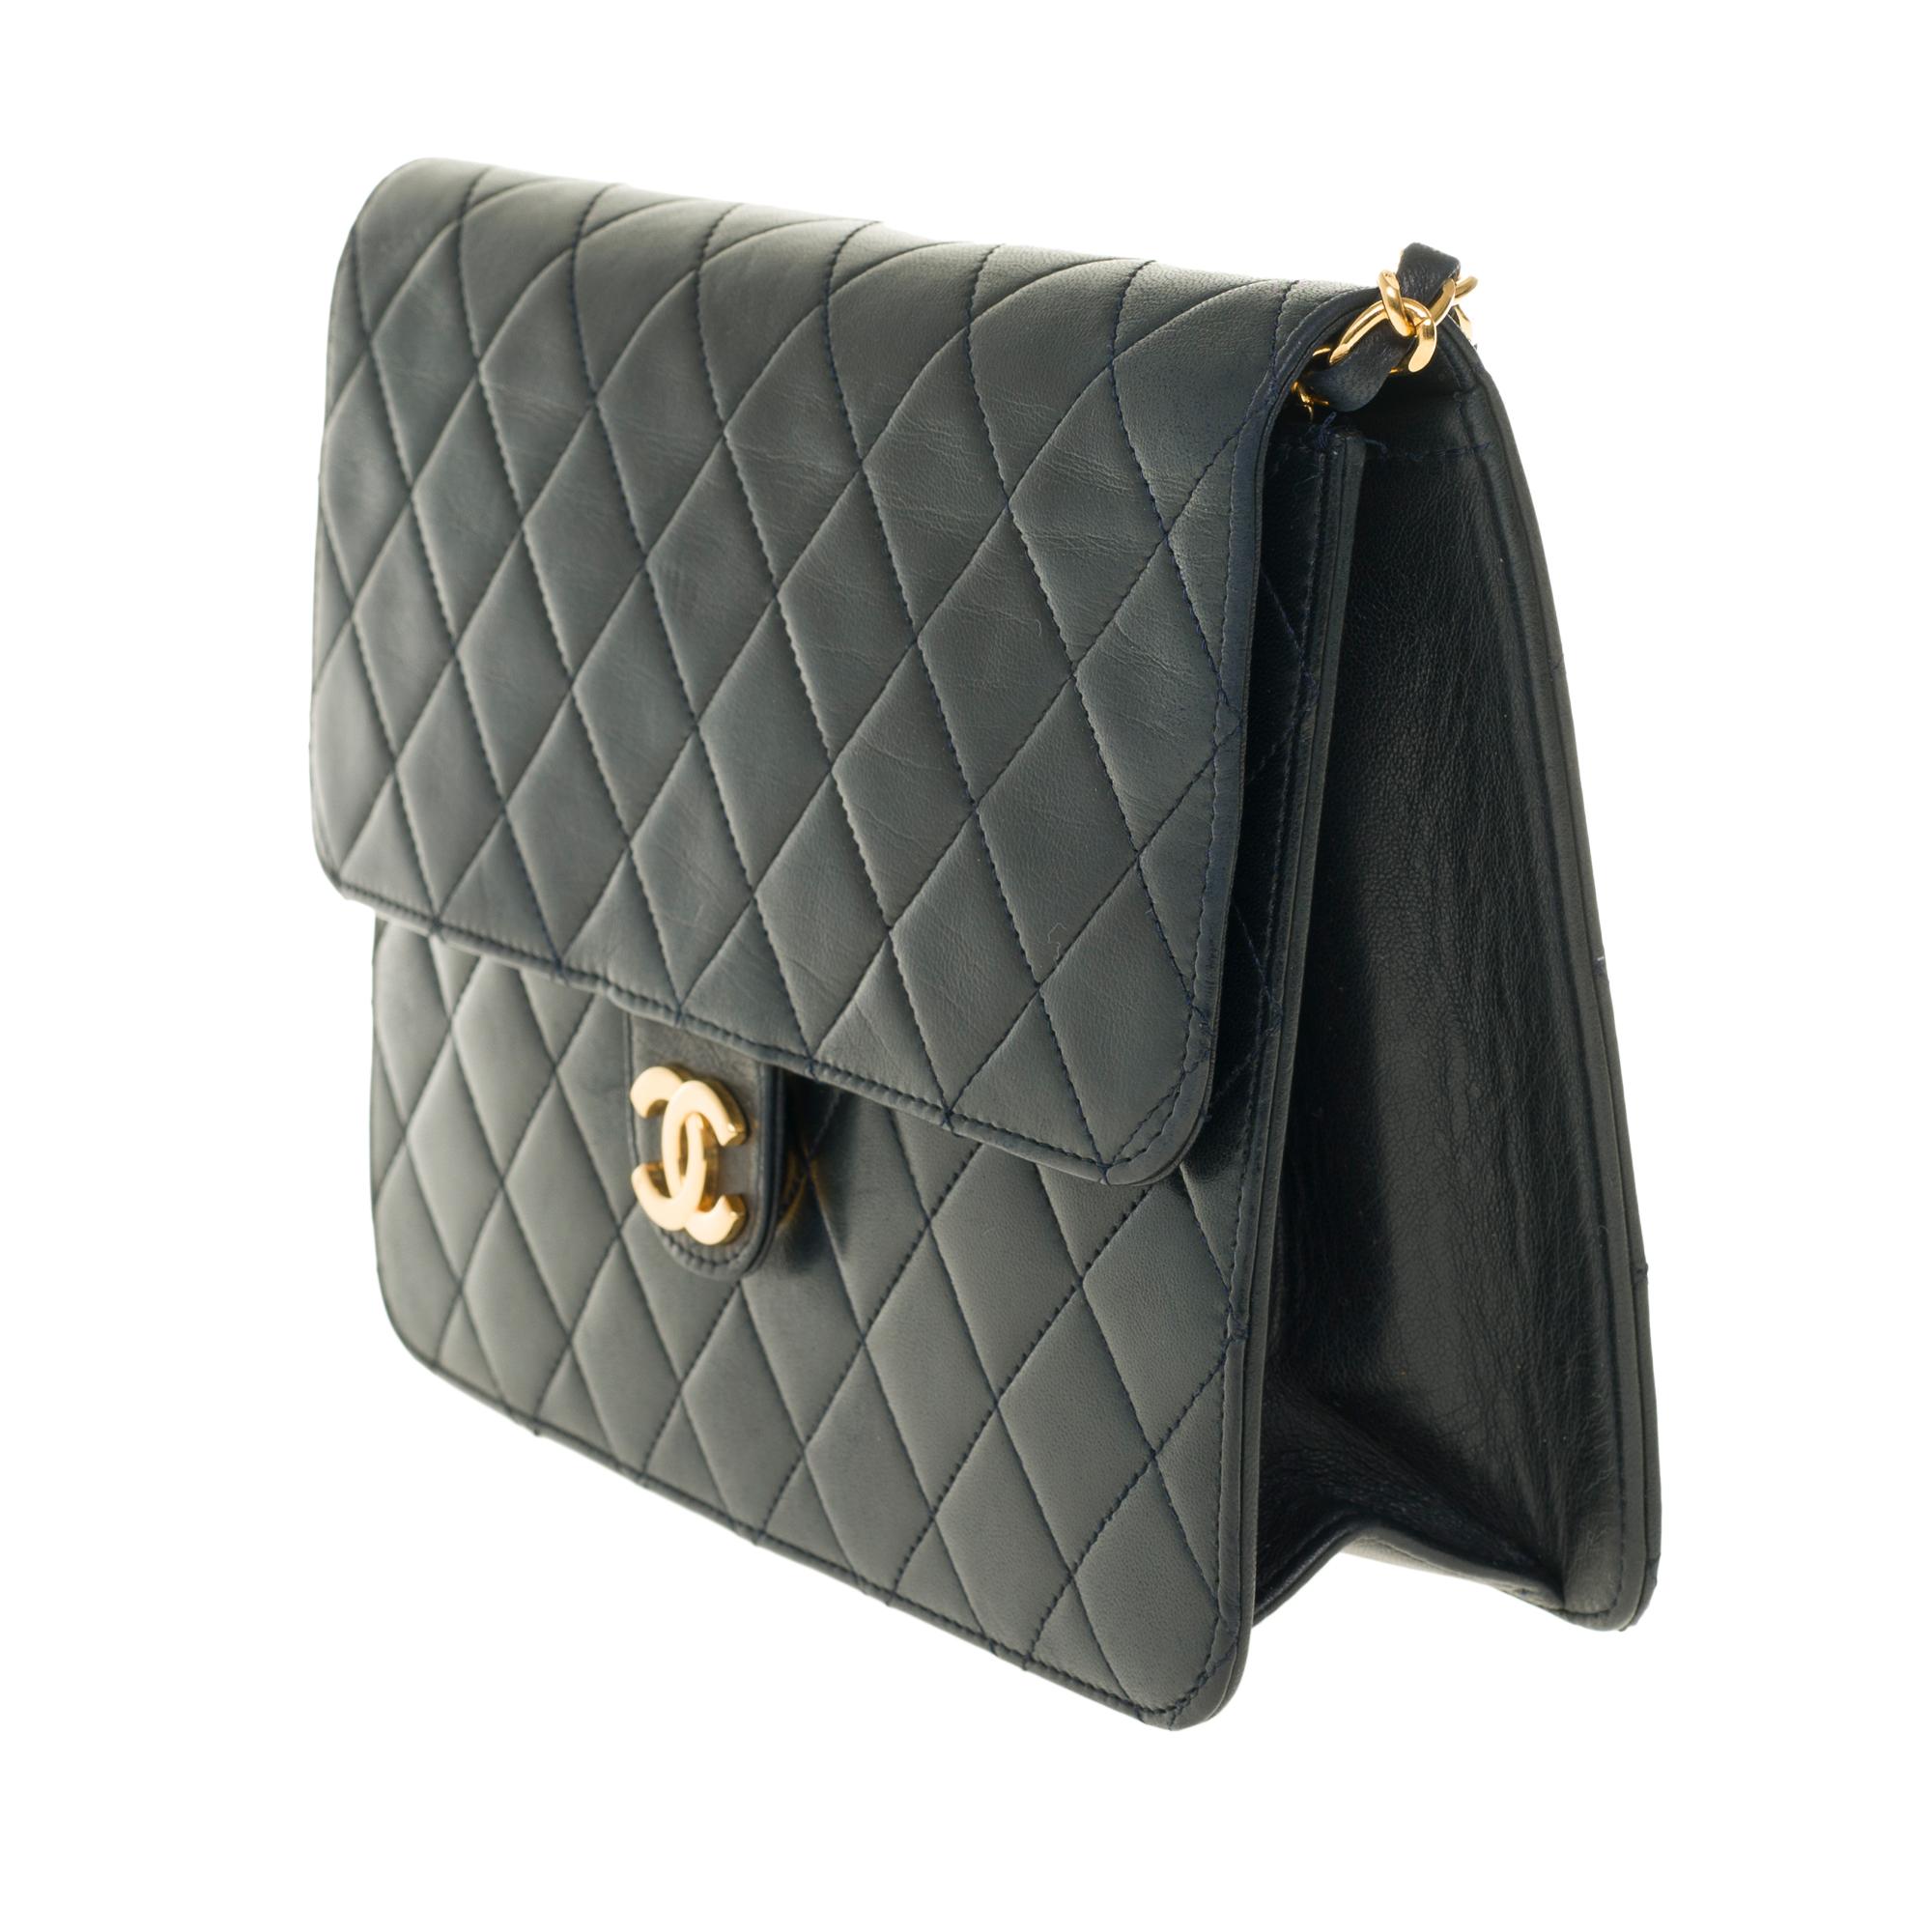 Black Stunning Chanel Classic handbag in black quilted lambskin with gold hardware